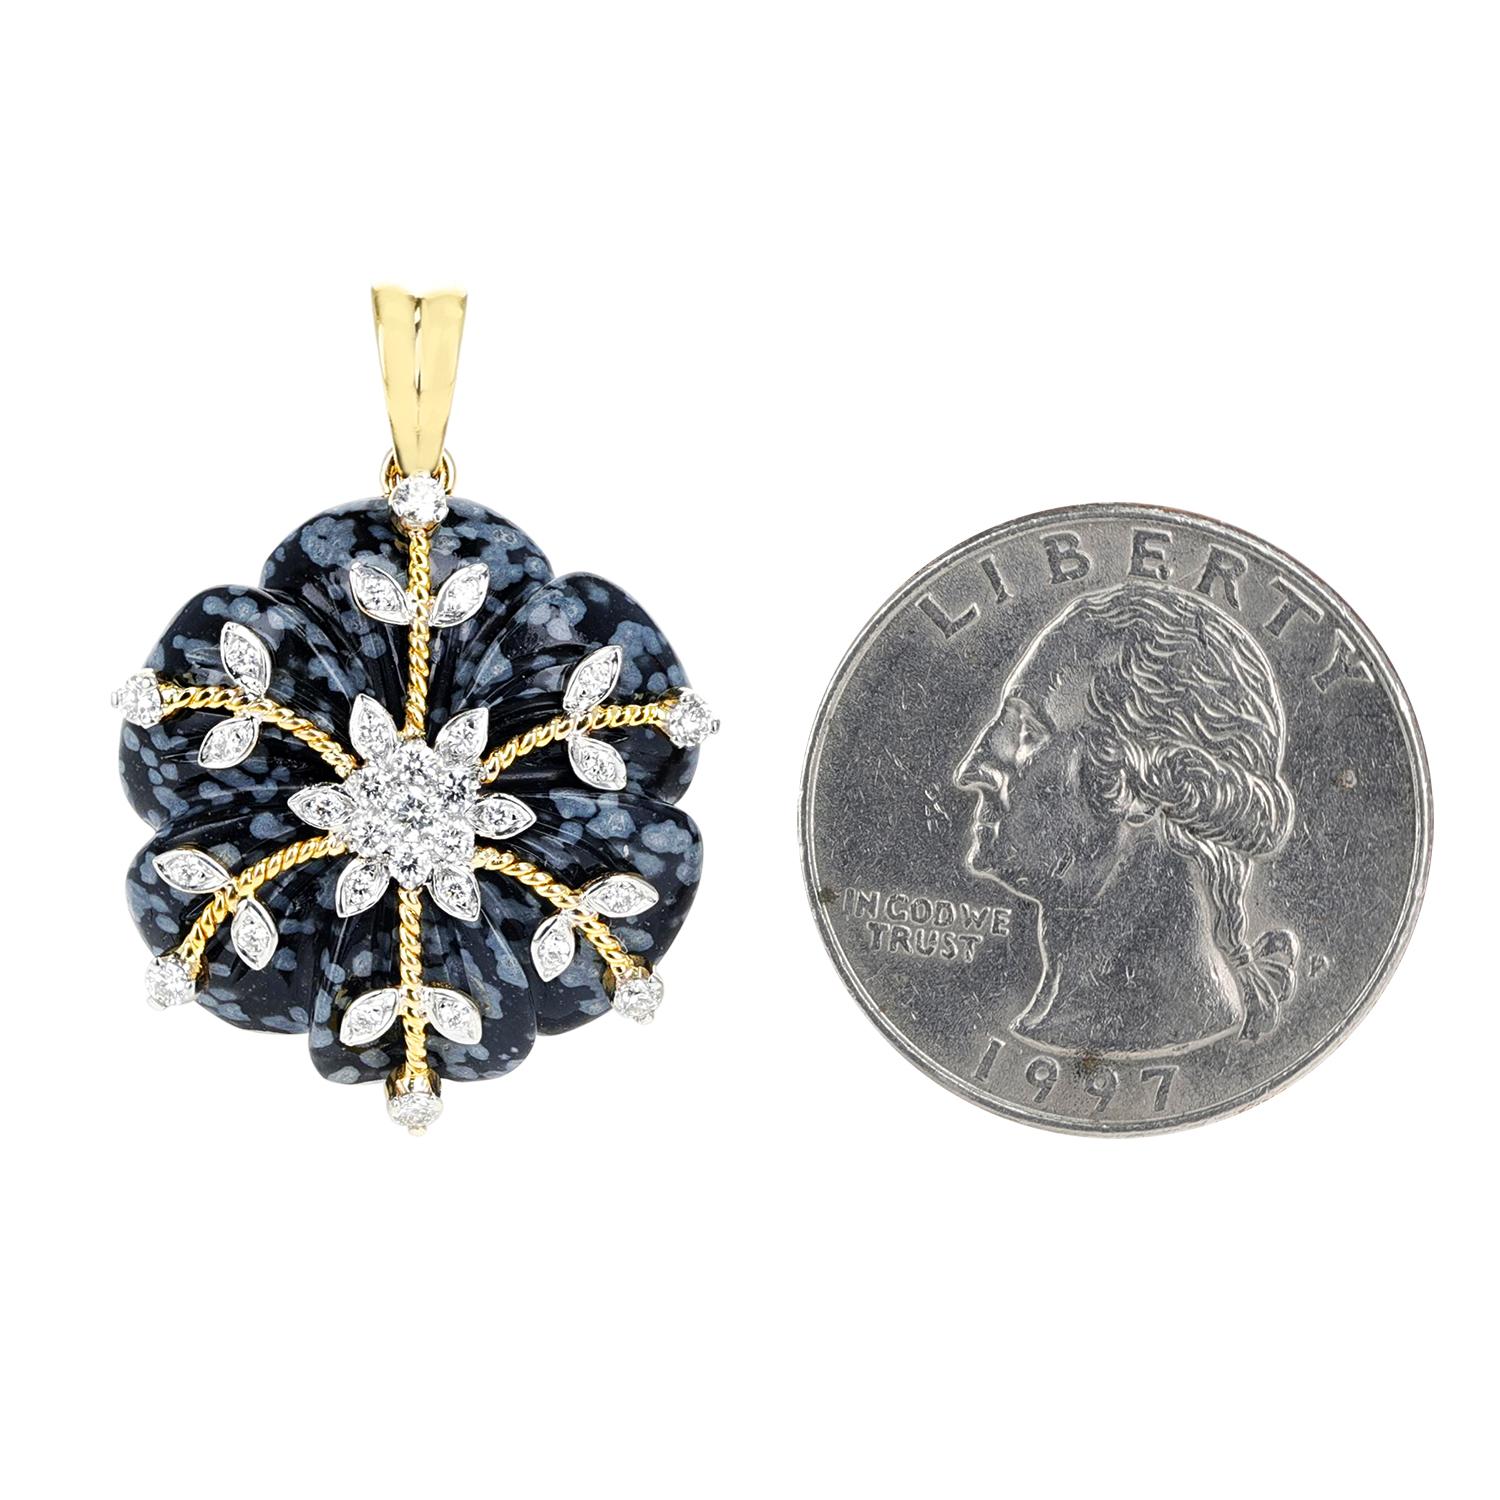 A Snowflake Obsidian Carved Floral Pendant with 14k Gold and Diamonds. Length: 1.10 inches. The total weight of the pendant is 5.40 grams. The snowflake obsidian is appx. 17 carats and the diamonds weigh appx. 0.36 carats. 